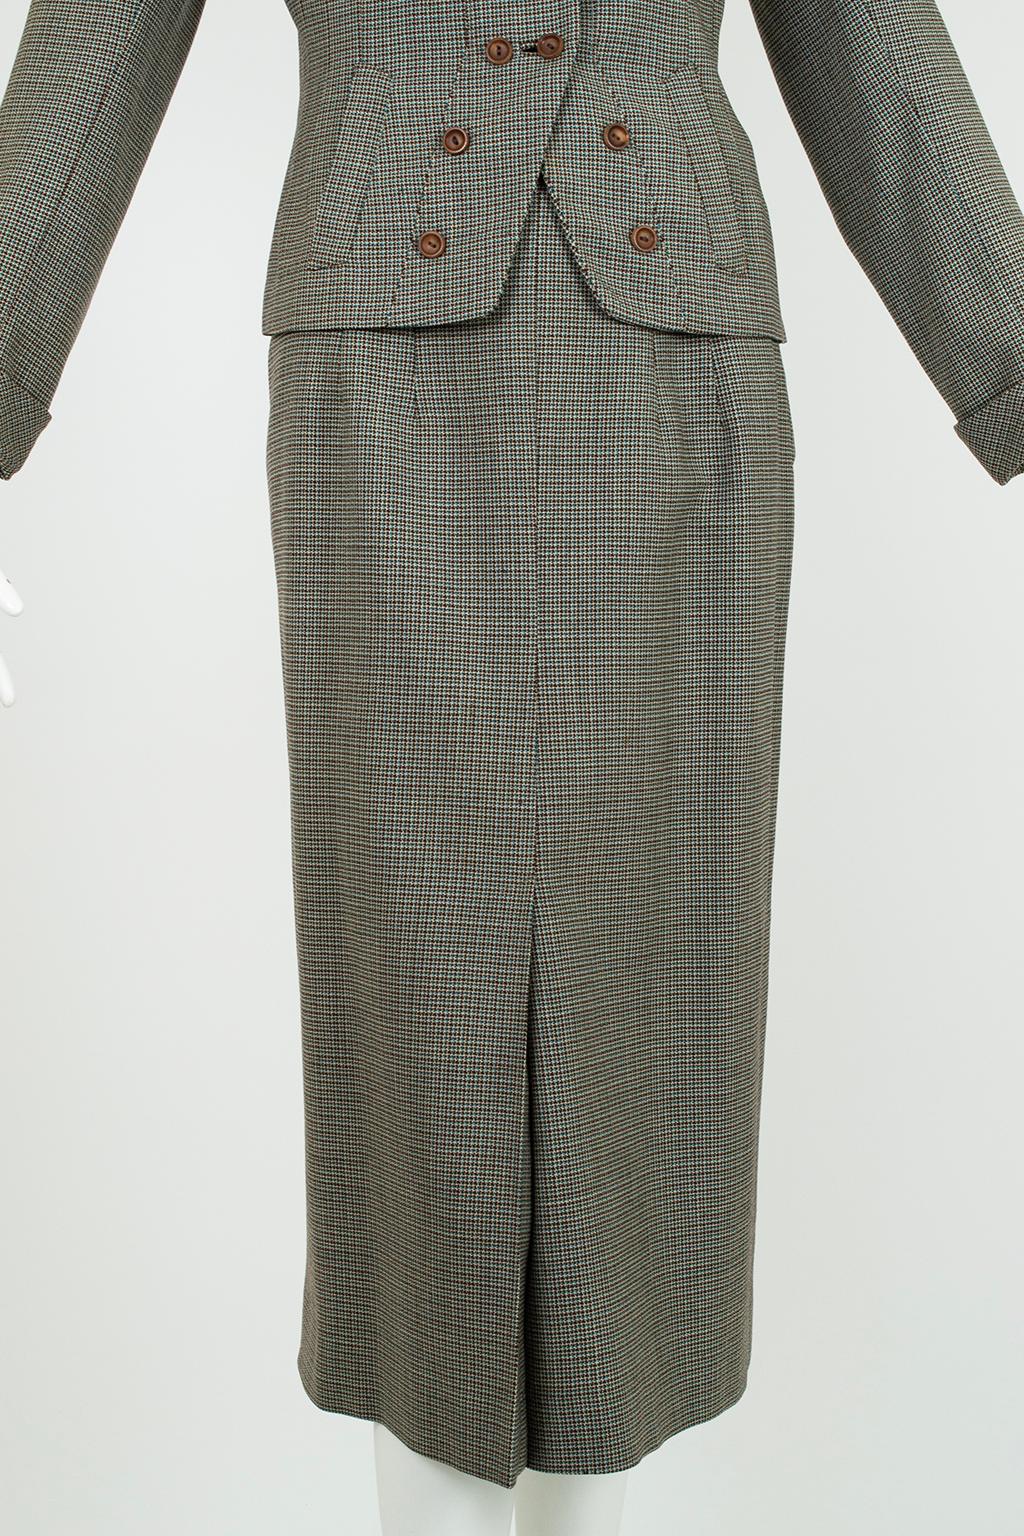 French Blue and Brown Houndstooth Cutaway Suit with Novelty Buttons – S-M, 1940s For Sale 7